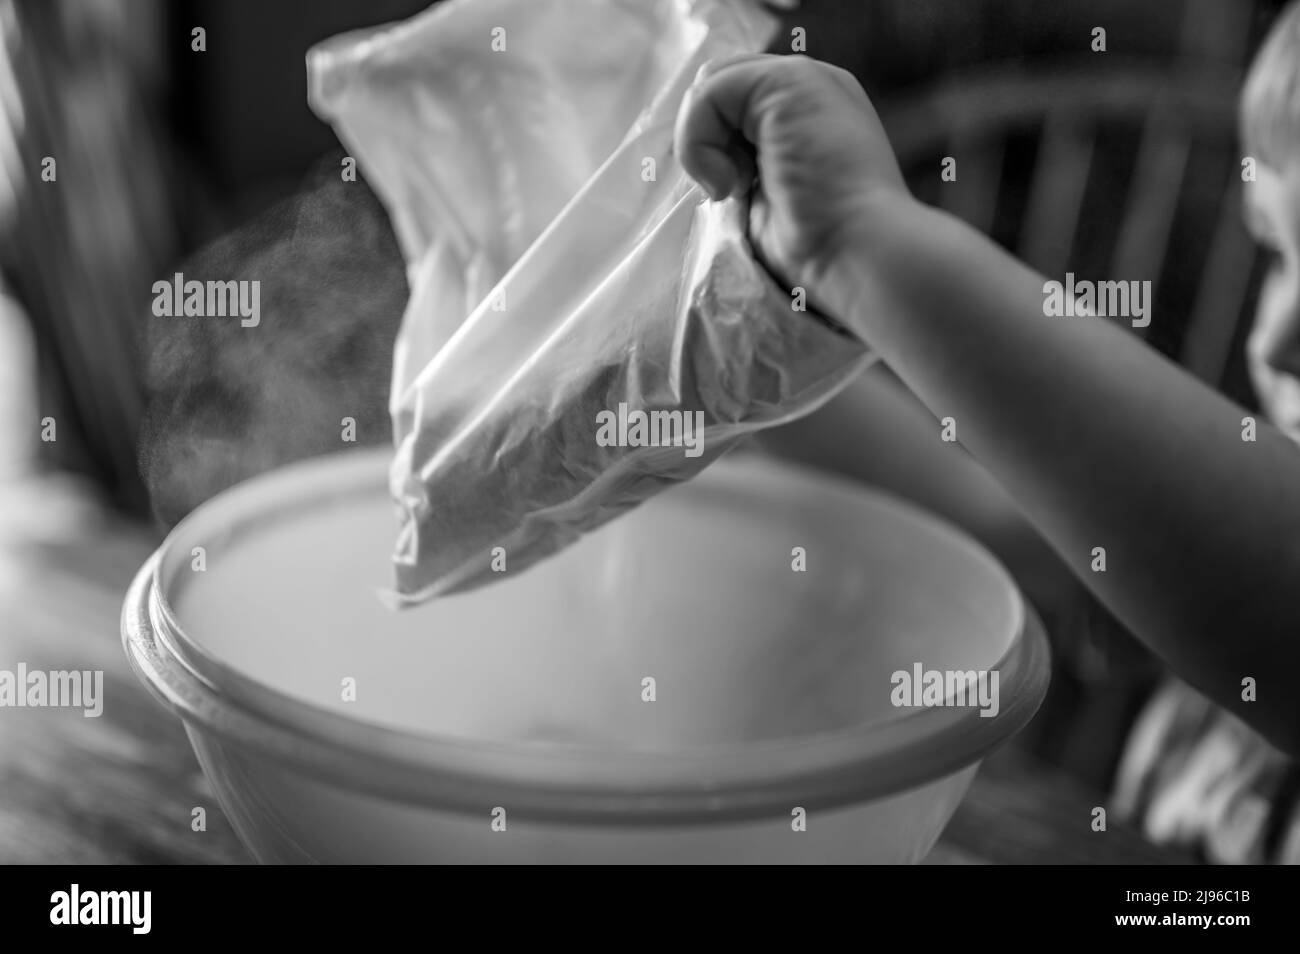 Little child dumping ingredients into a bowl causing dust to rise into the air. Stock Photo